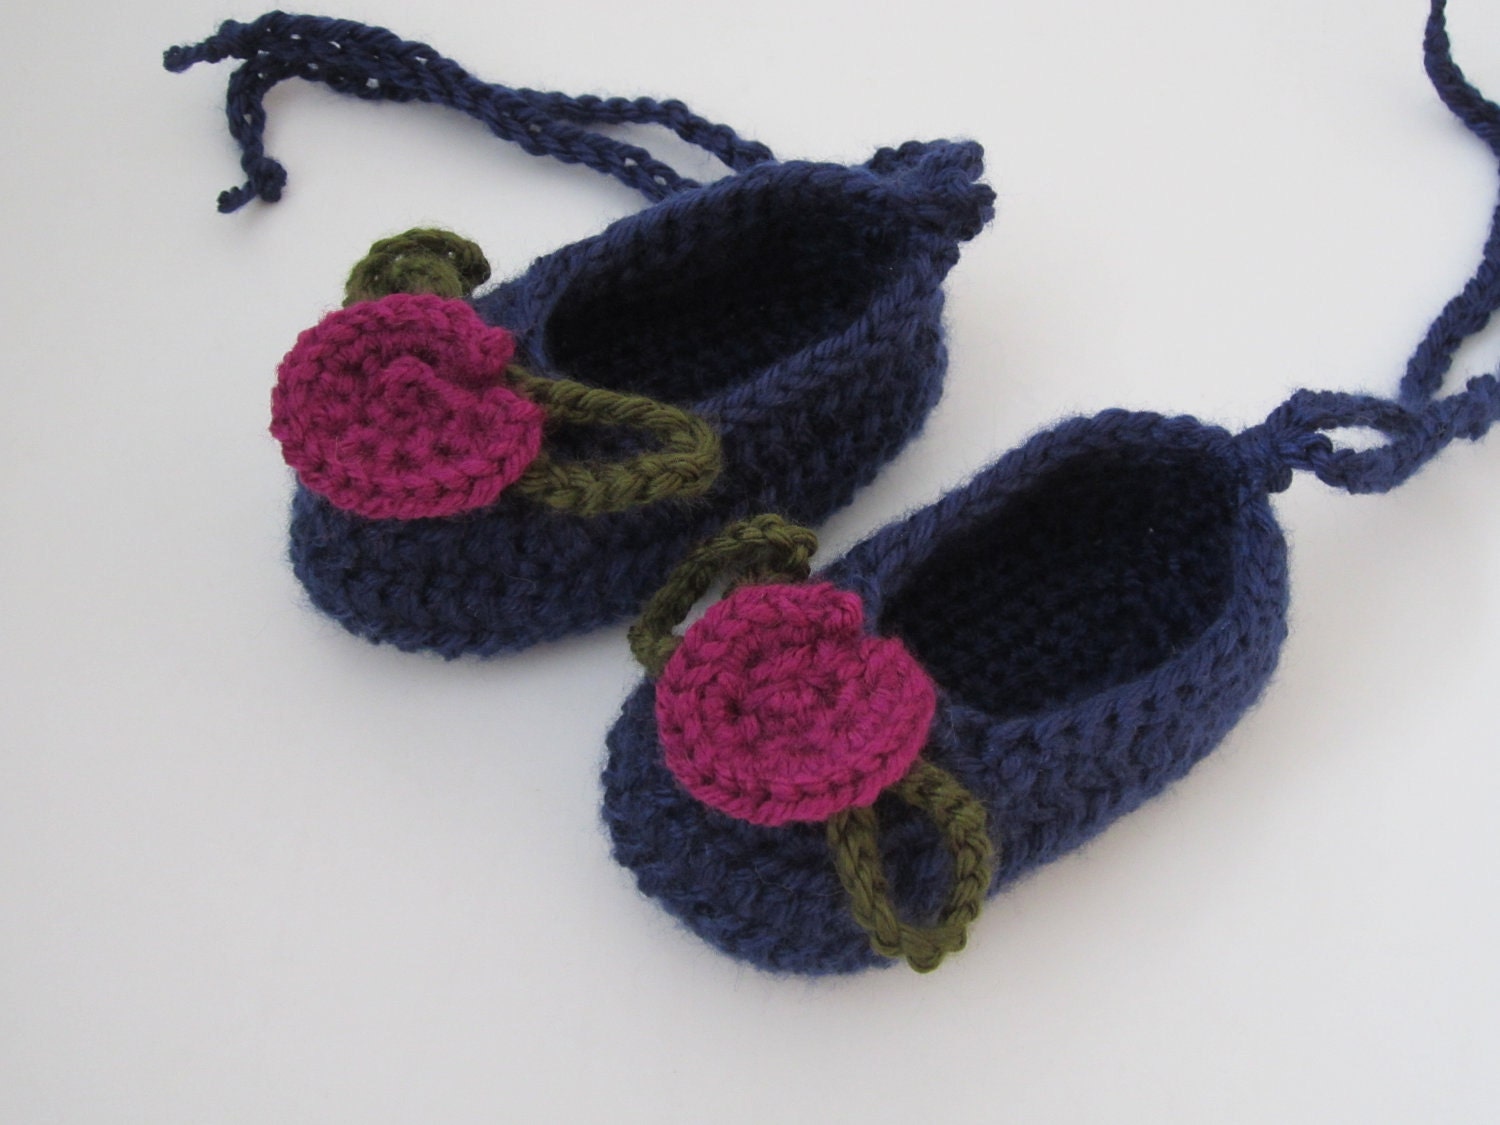 Crocheted Baby Ballerina Style Booties - Blue with Magenta Flower - Fits 6 to 9 months